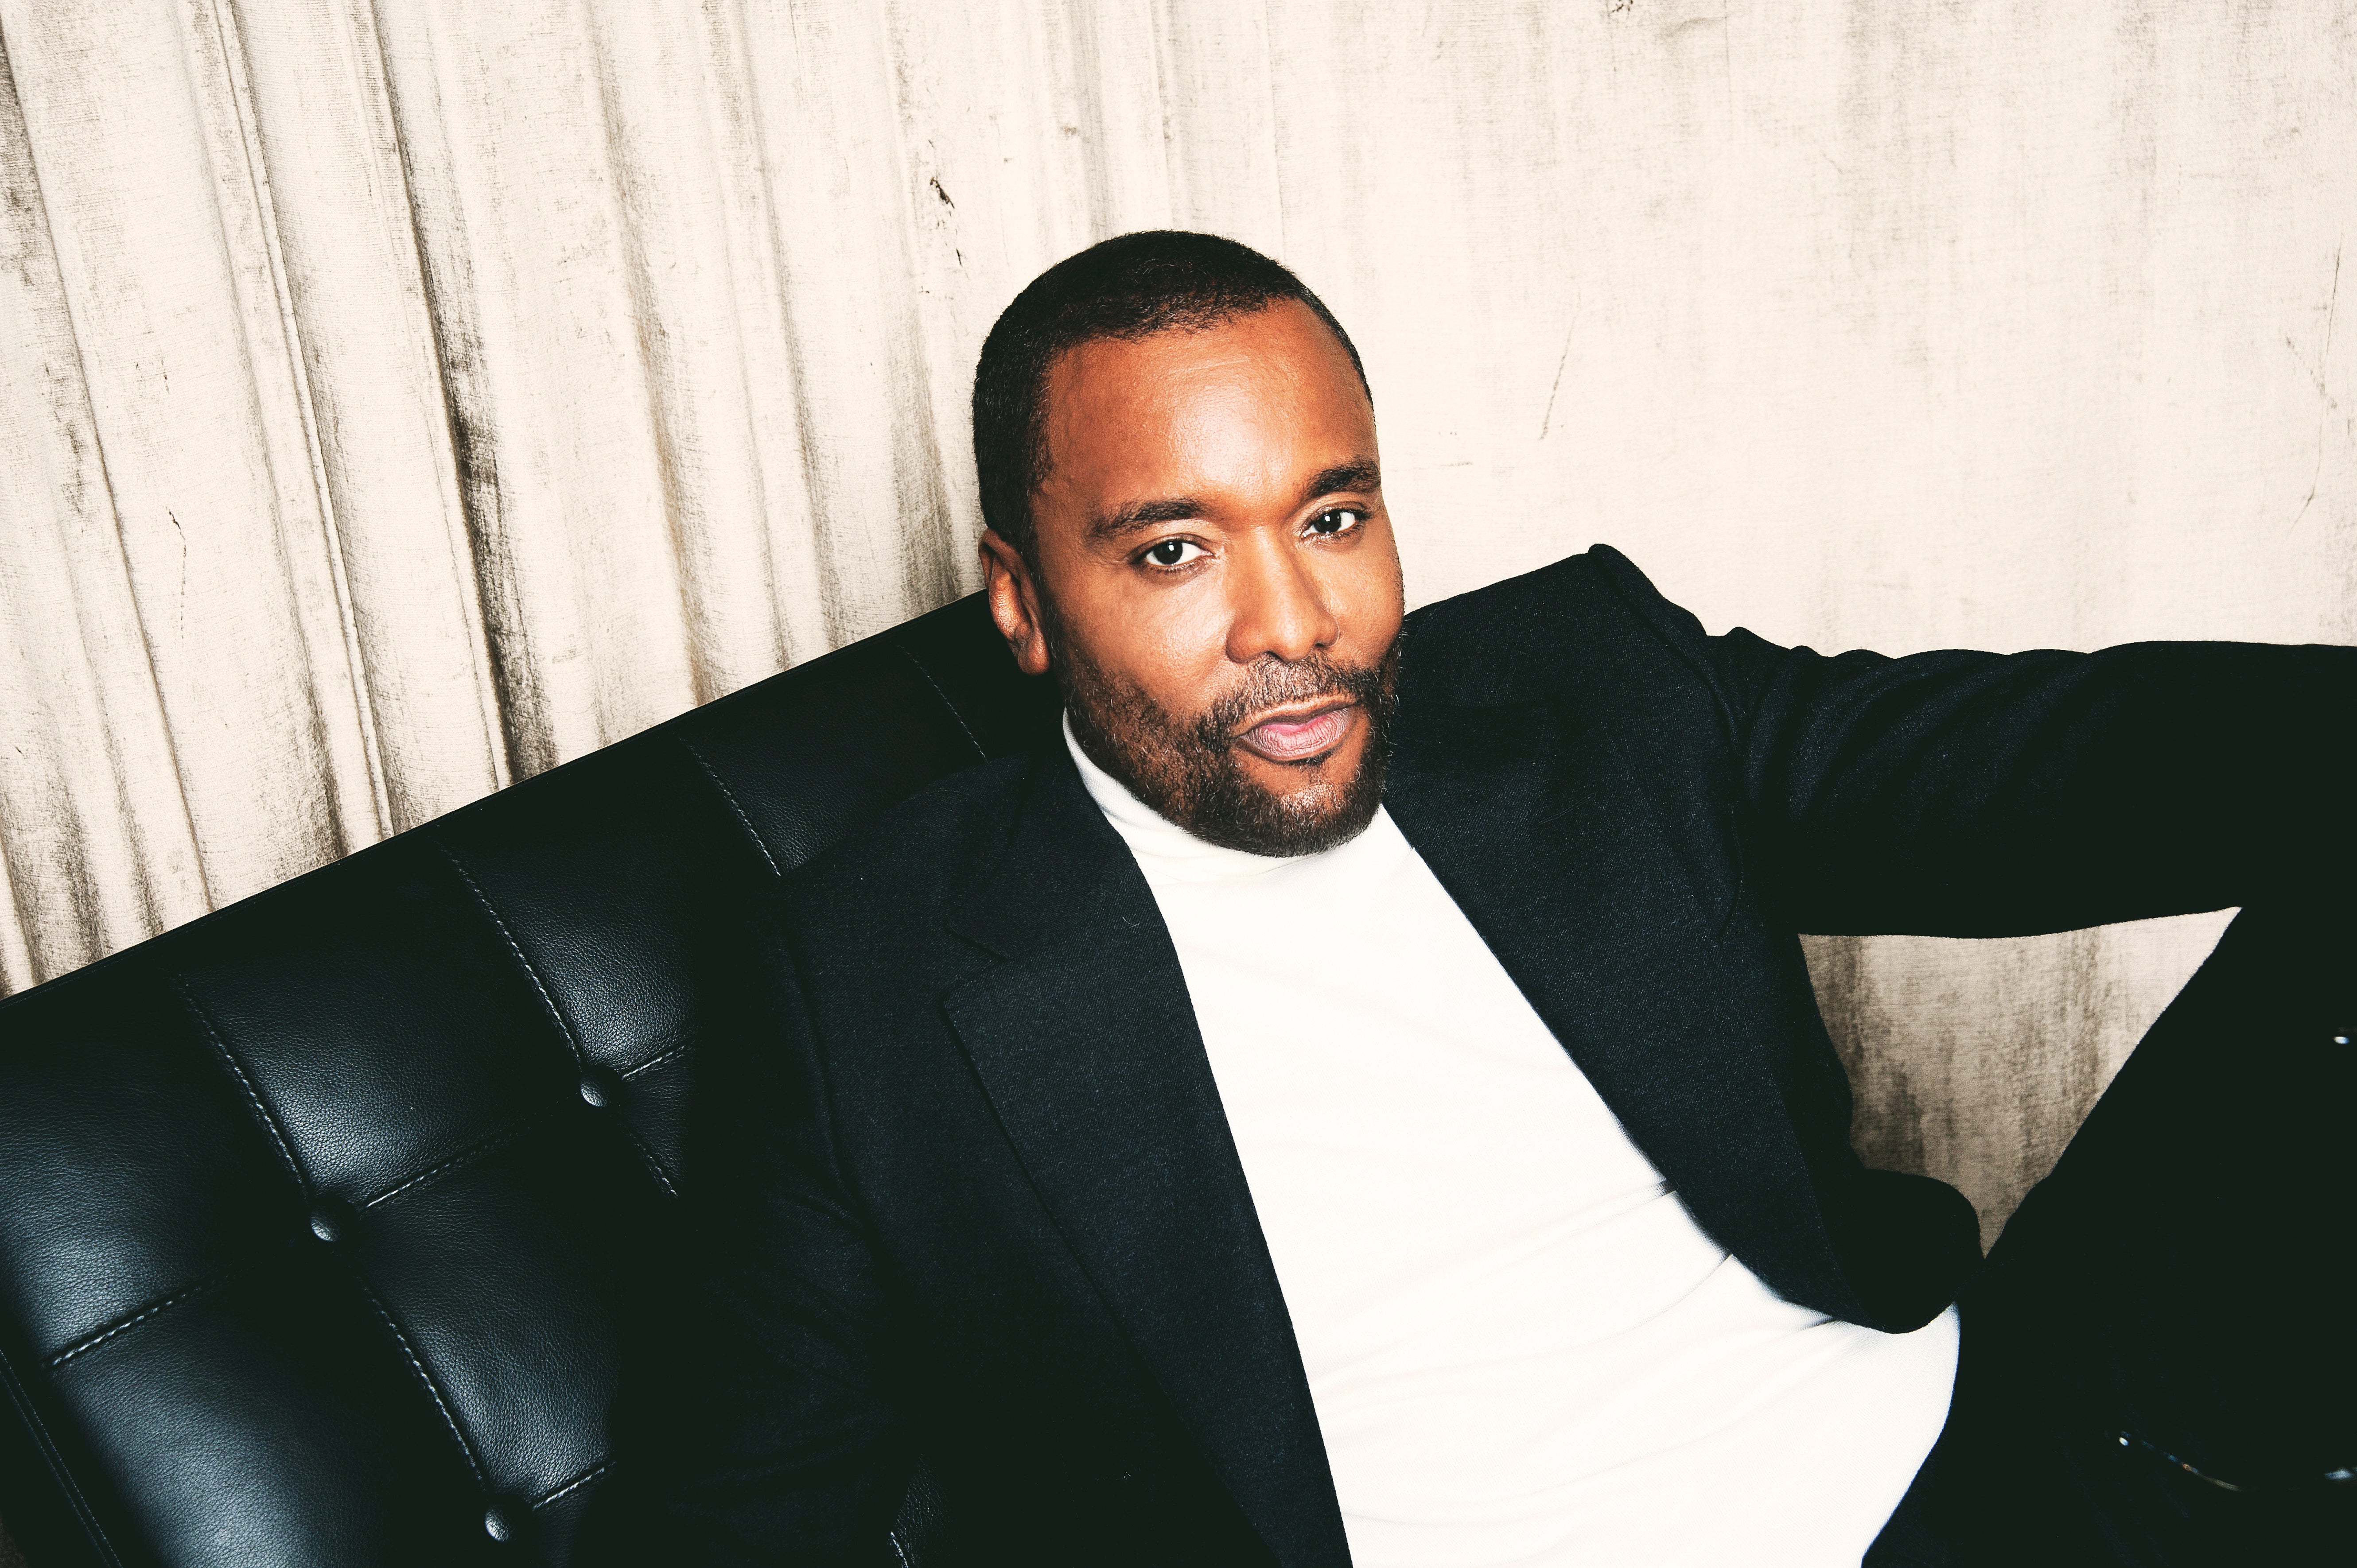 Lee Daniels On Philanthropy, Stardom and How He’s Building An Empire
